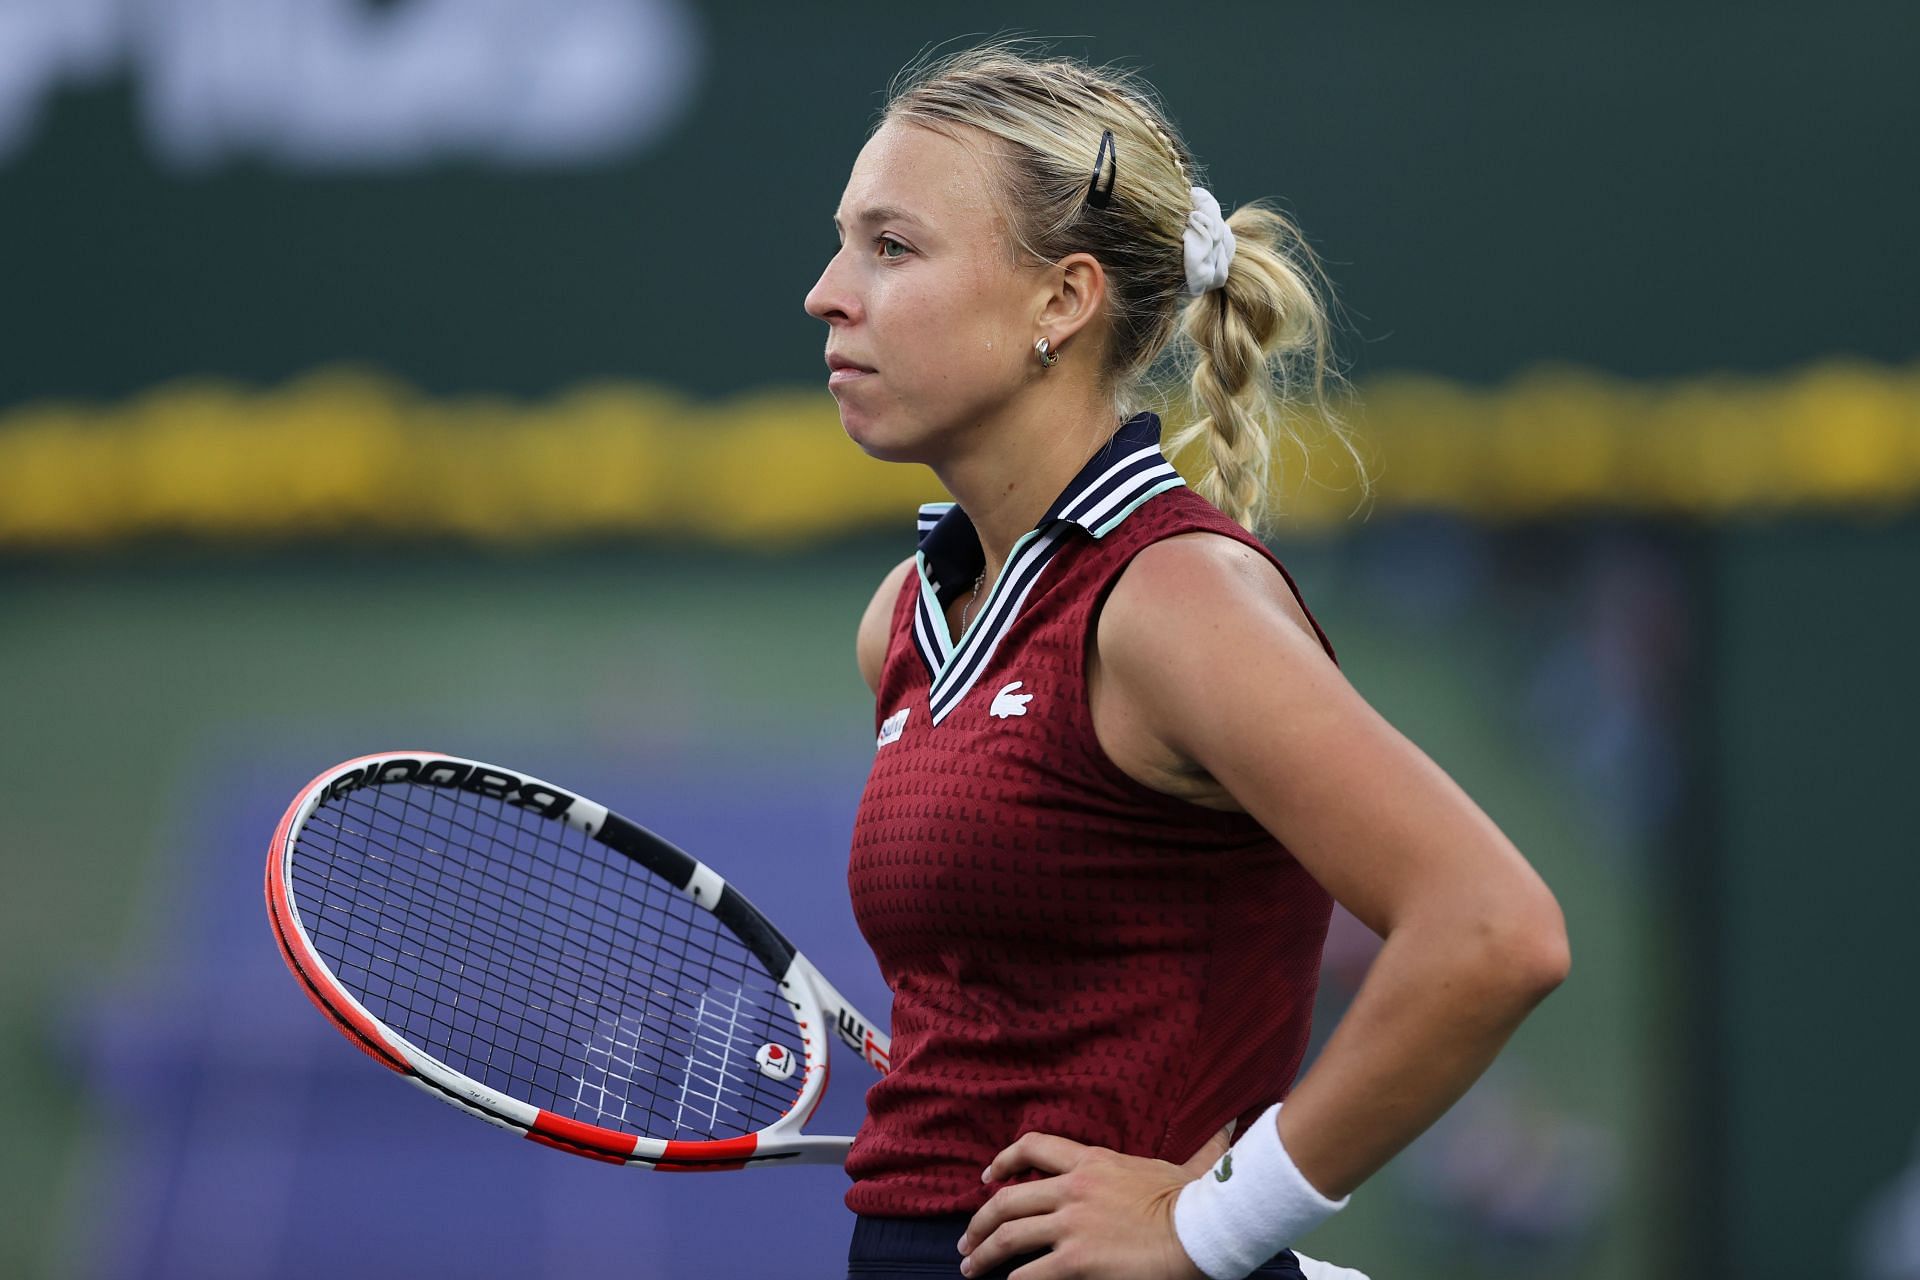 Anett Kontaveit looks on during a match at the BNP Paribas Open